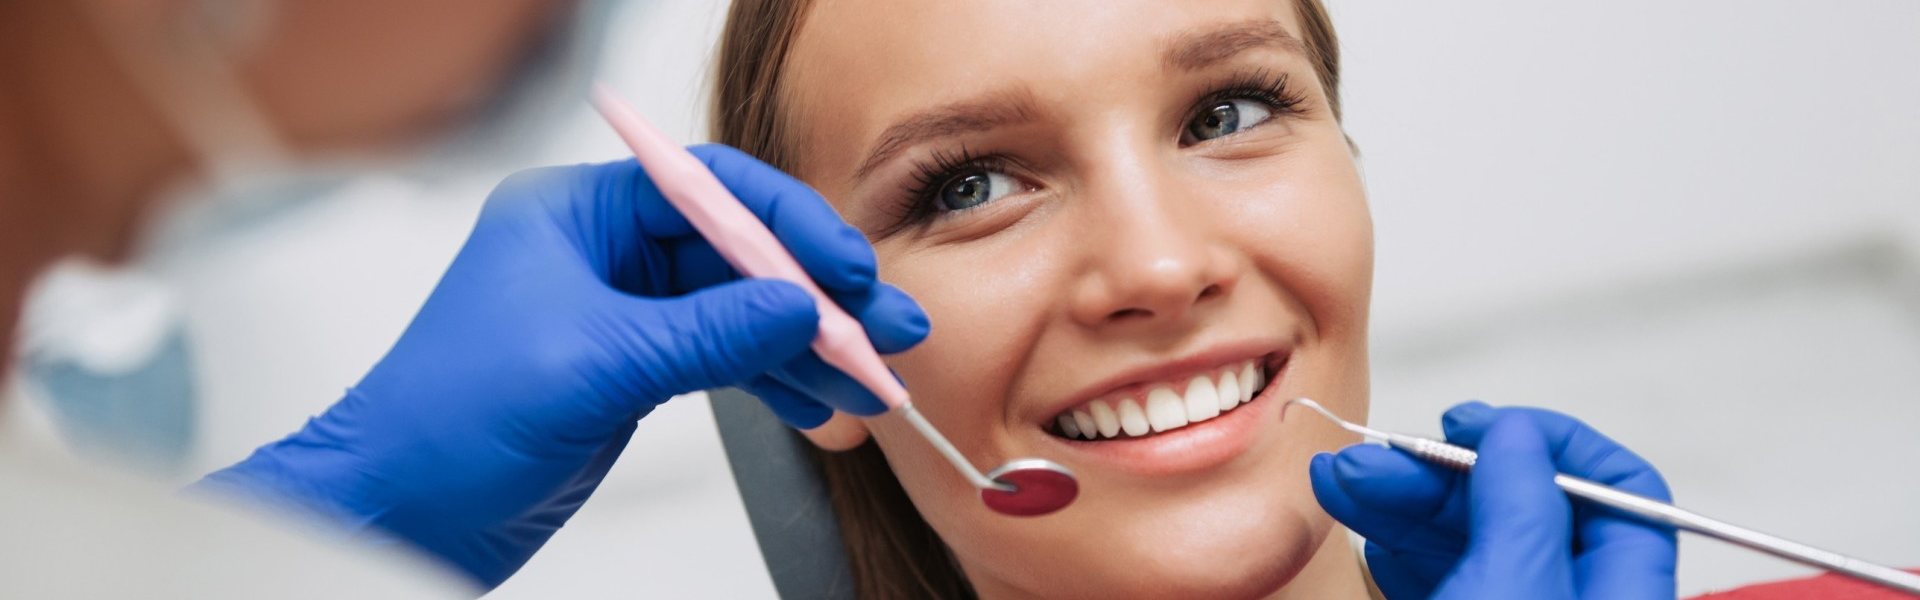 Tooth Extraction – Types, Procedure and Aftercare